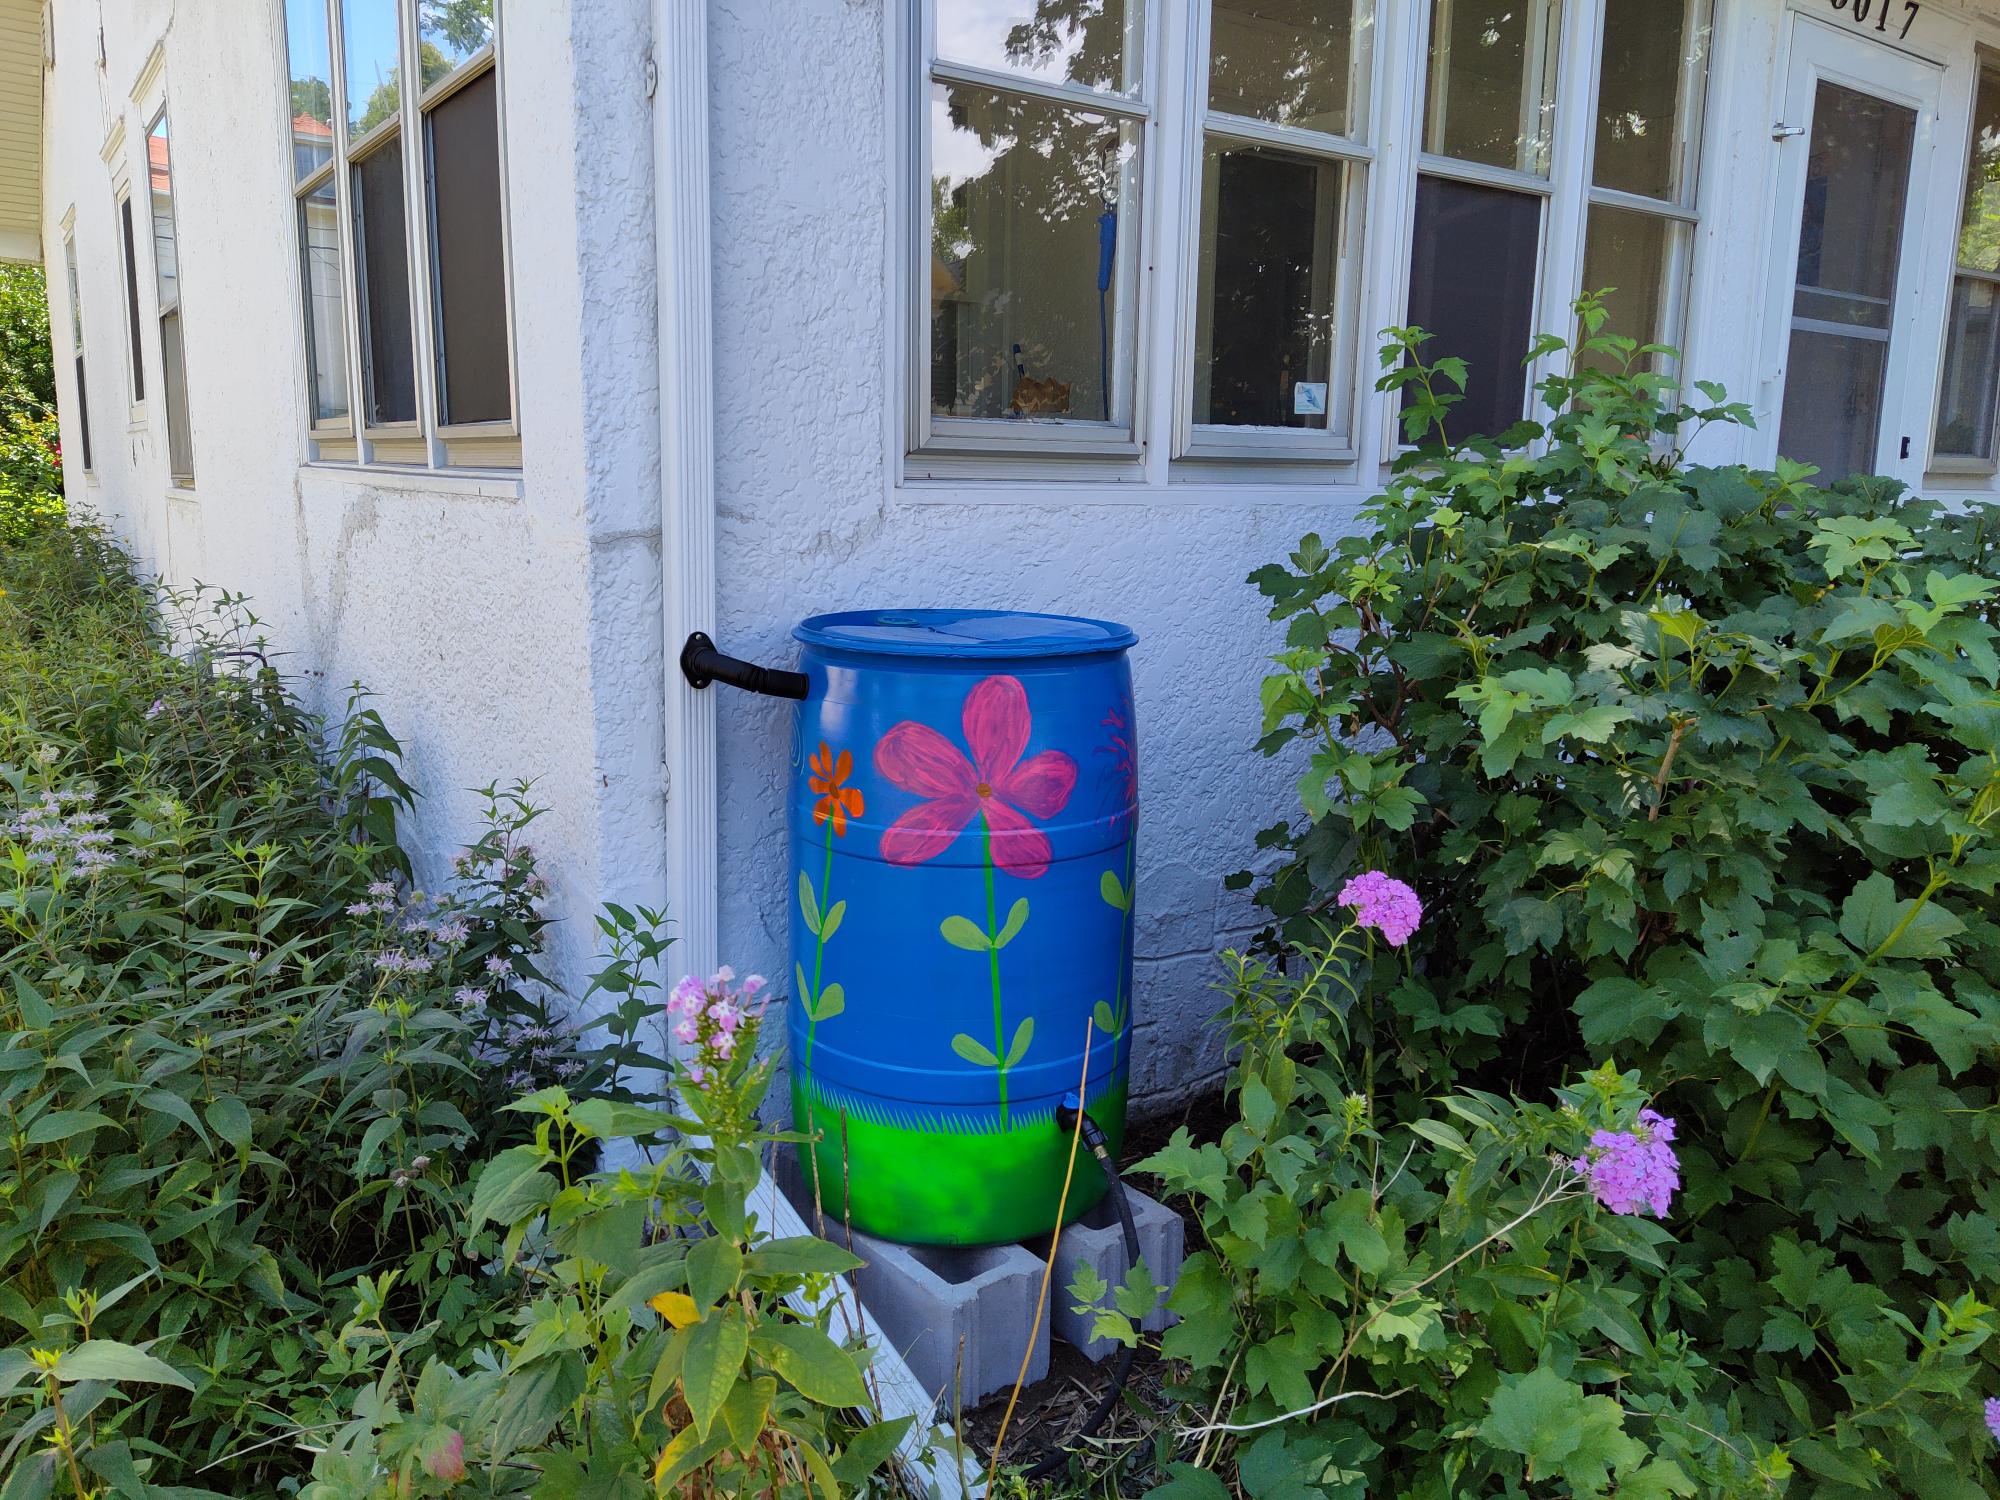 Rain barrel attached to gutter, painted with flowers